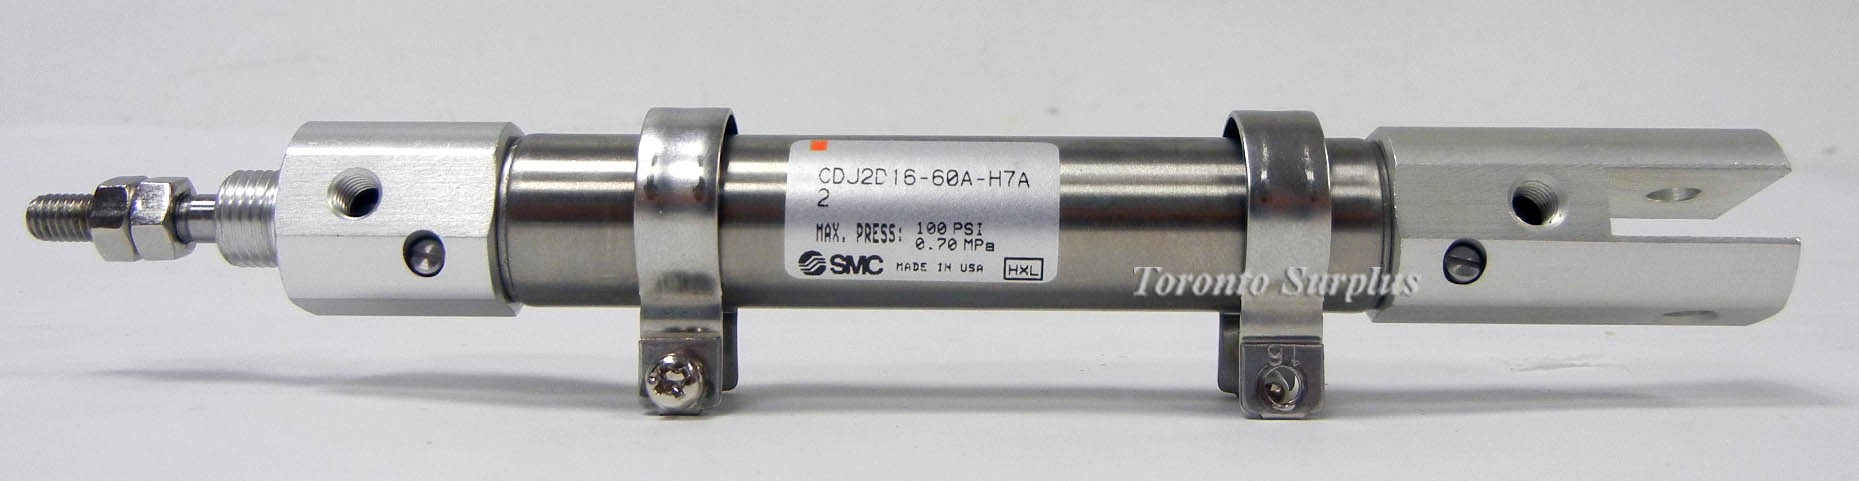 SMC Pneumatic CDJ2D16-60A-H7A2 Round Body Air Cylinder: Standard Type Double Acting, Single Rod, Brand New / NO